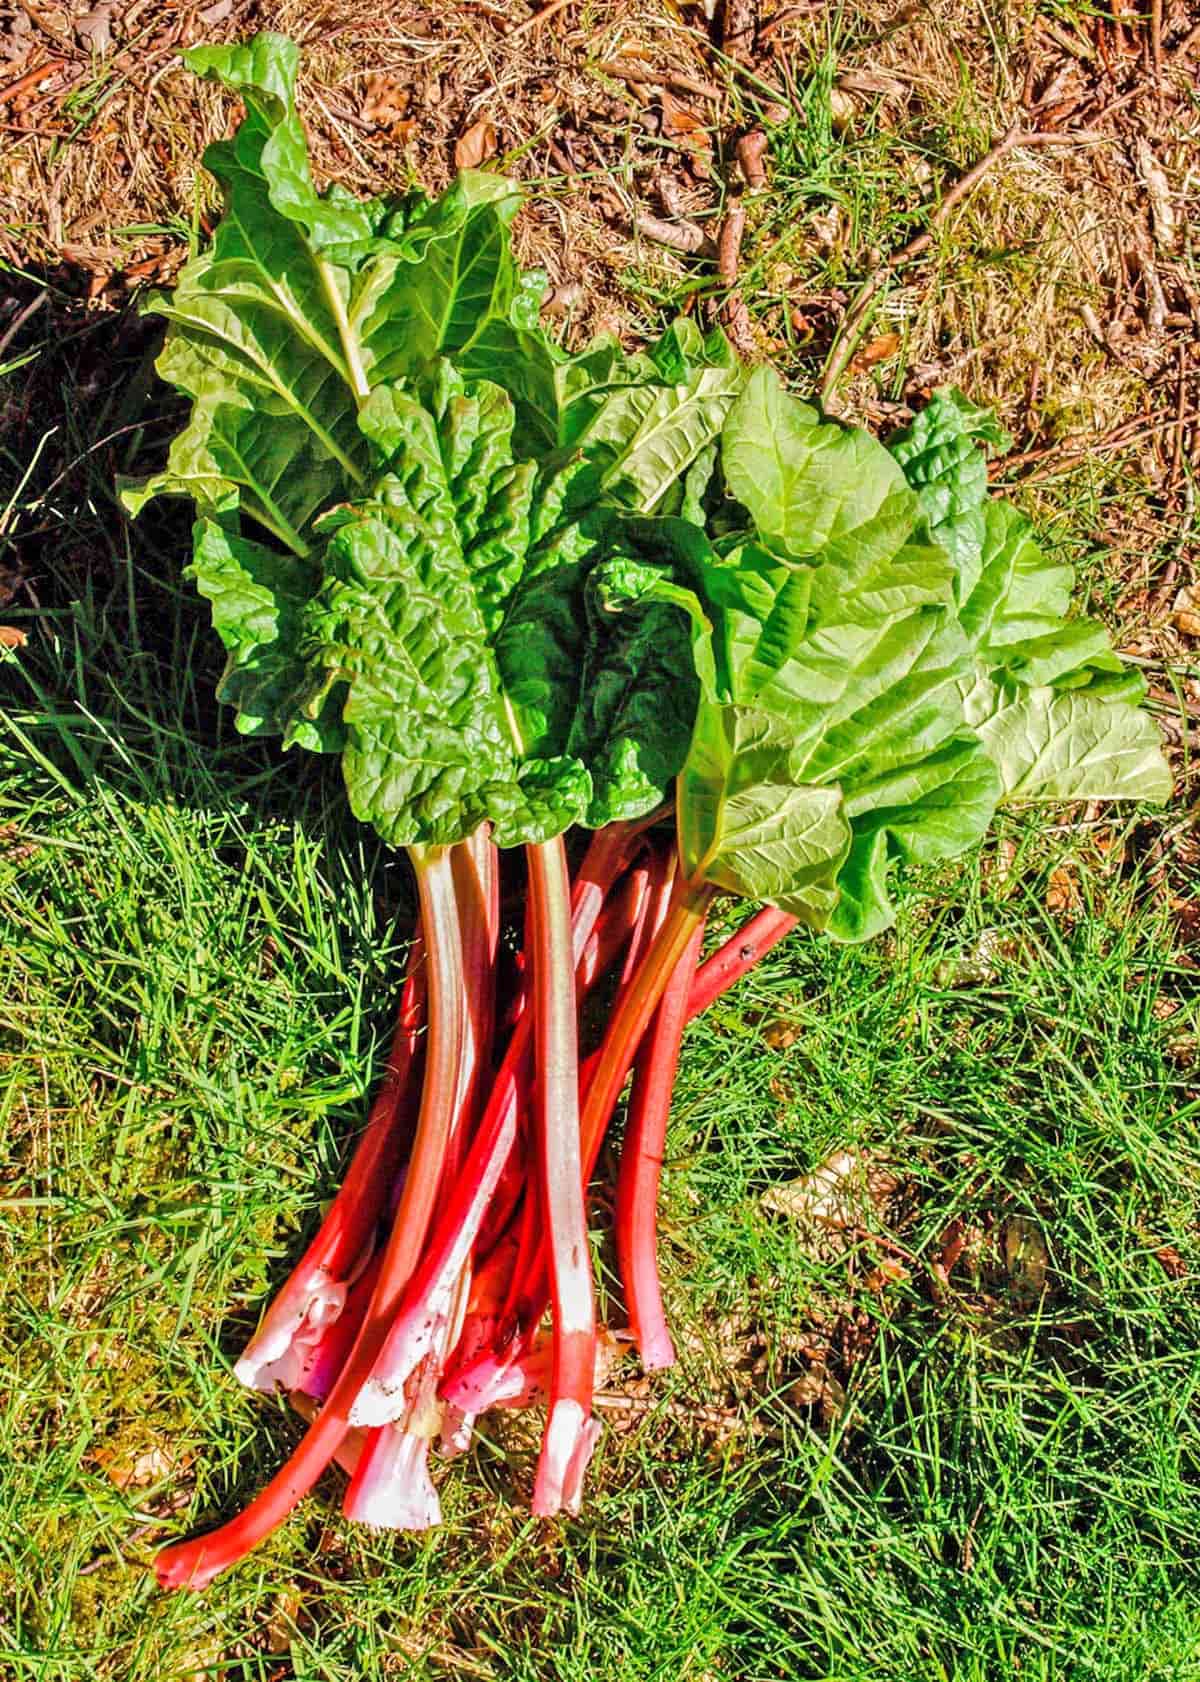 Rhubarb with leaves and stems